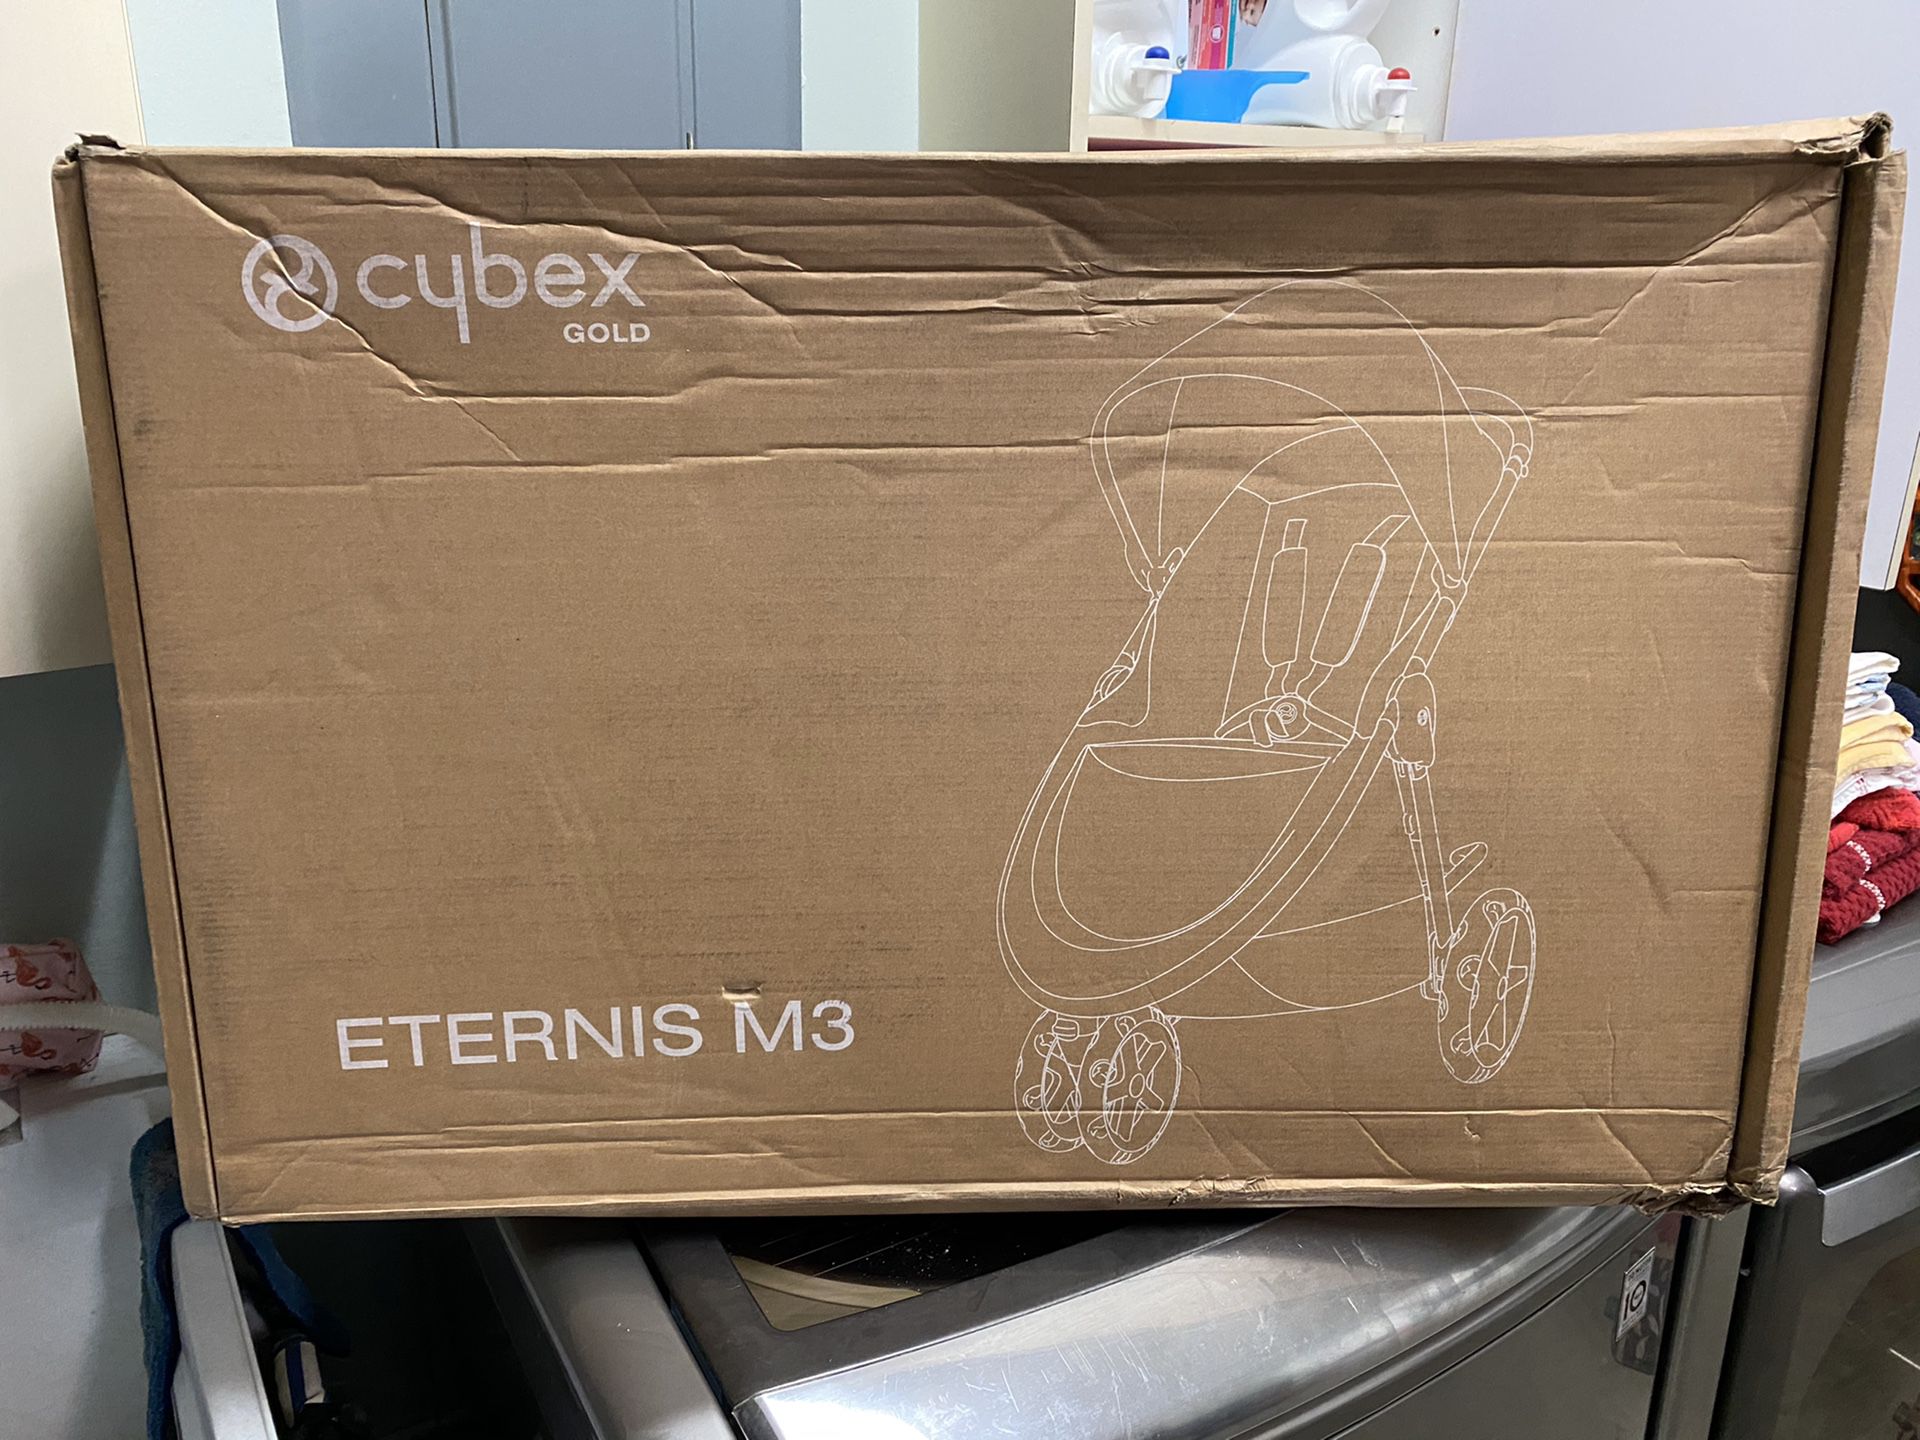 For Sale Brand New CYBEX Gold Eternis M3 Stroller in Red